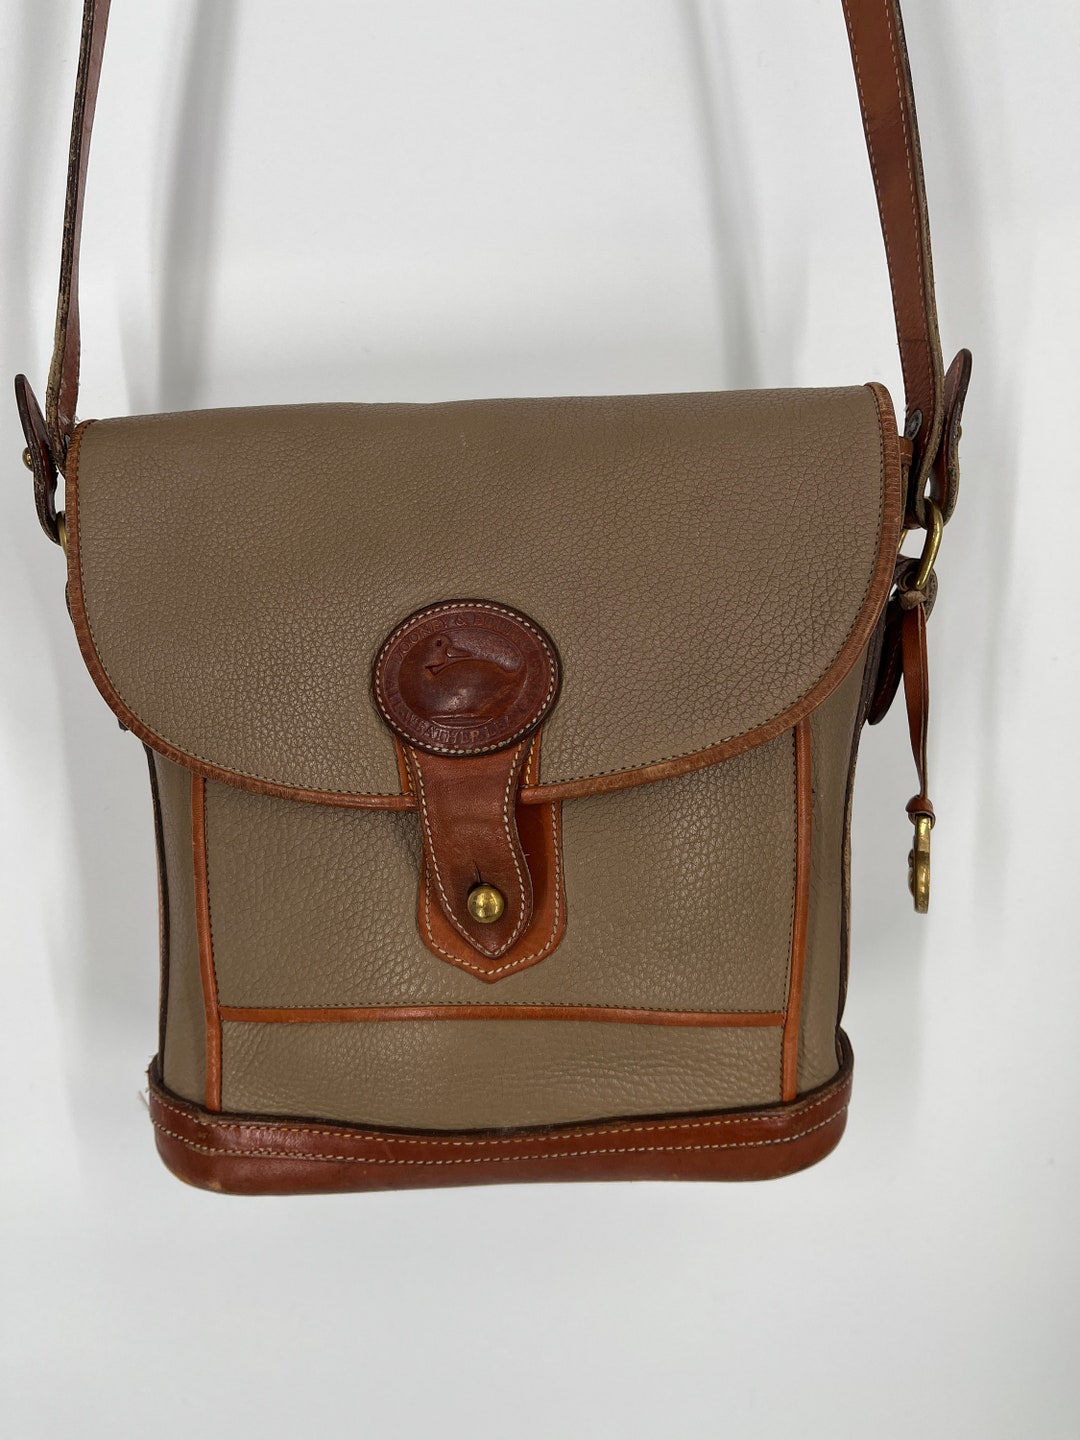 Dooney & Bourke, Bags, Vintage Dooney And Bourke Pebble Leather Crossbody  Purse Green Fake Knockoff